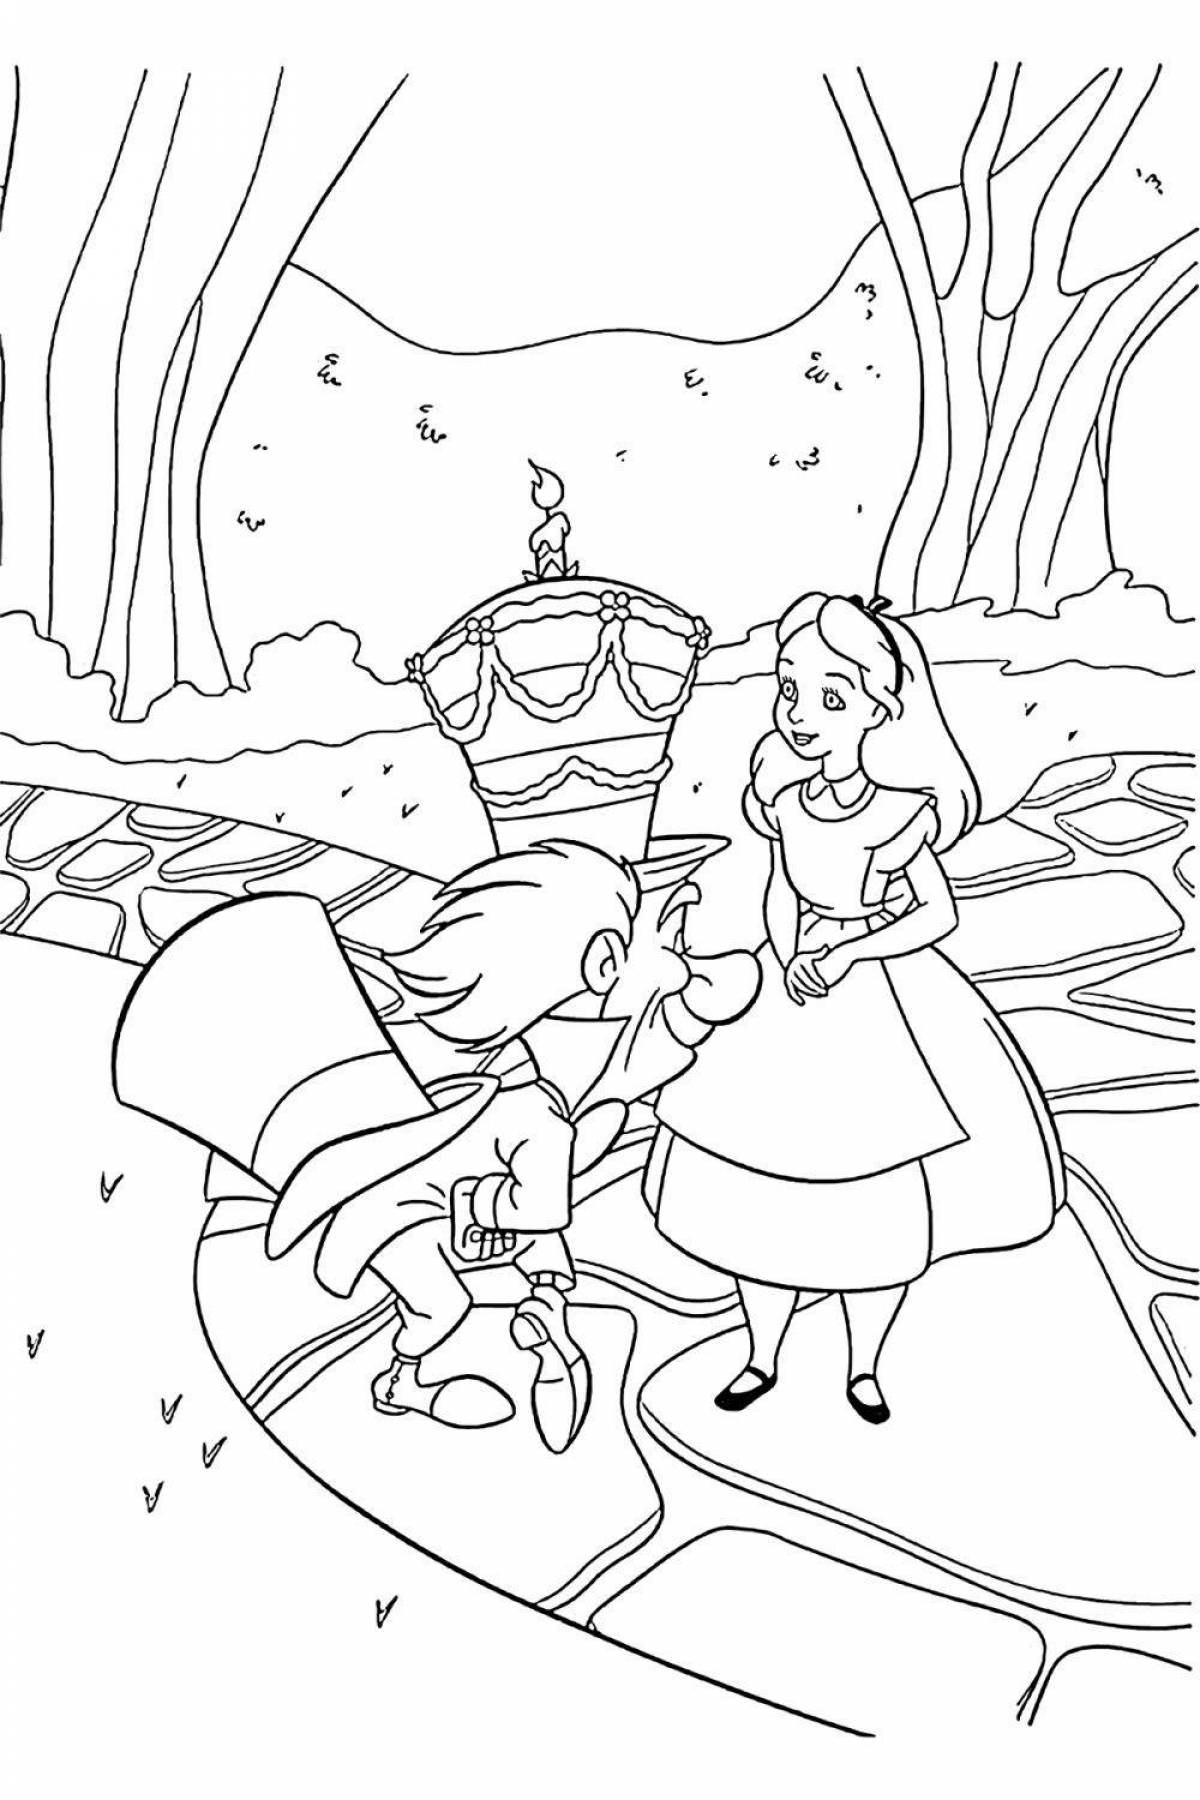 Shinning alice find coloring page